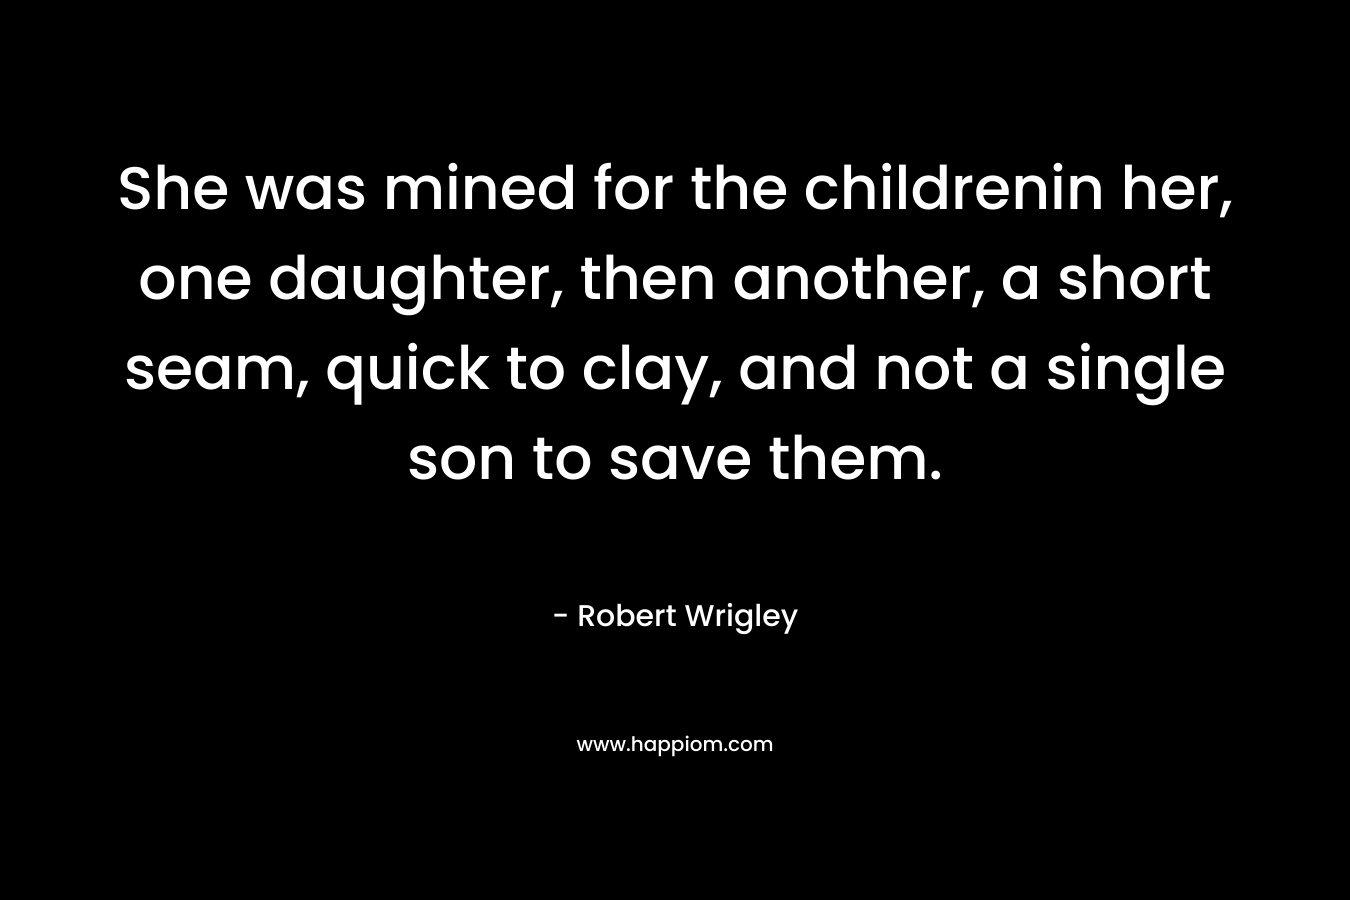 She was mined for the childrenin her, one daughter, then another, a short seam, quick to clay, and not a single son to save them. – Robert Wrigley